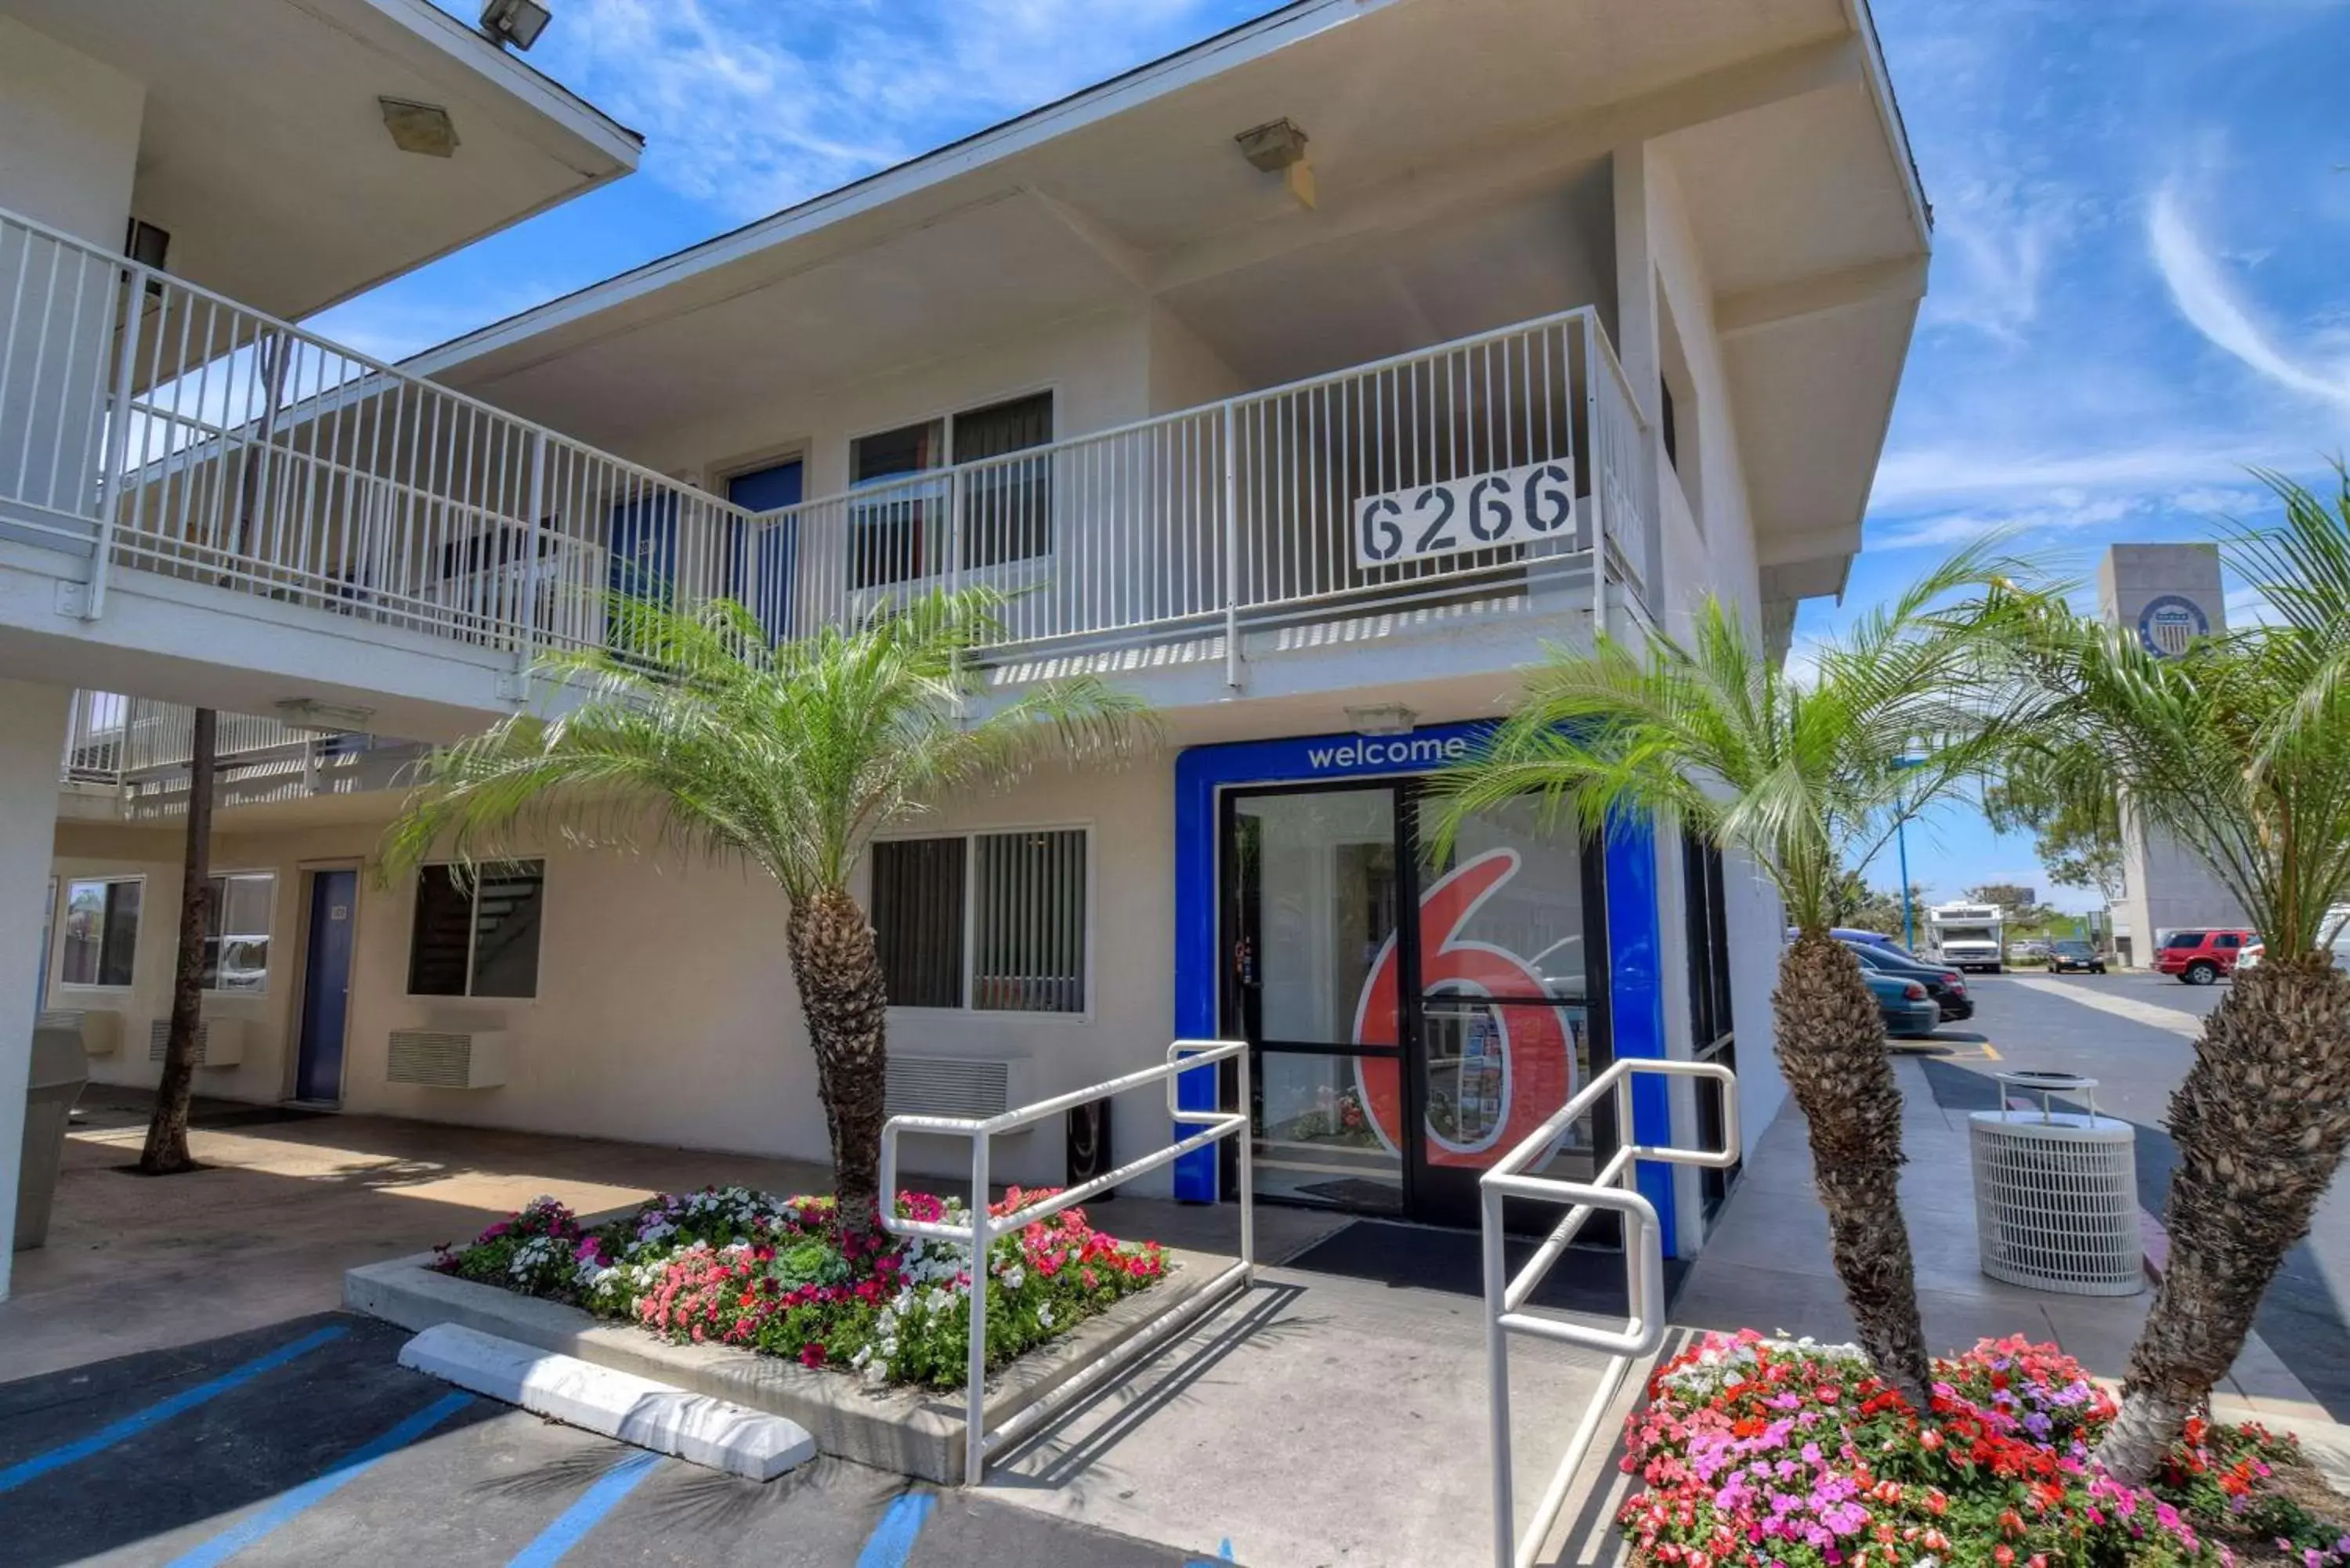 Property building in Motel 6-Westminster, CA - South - Long Beach Area